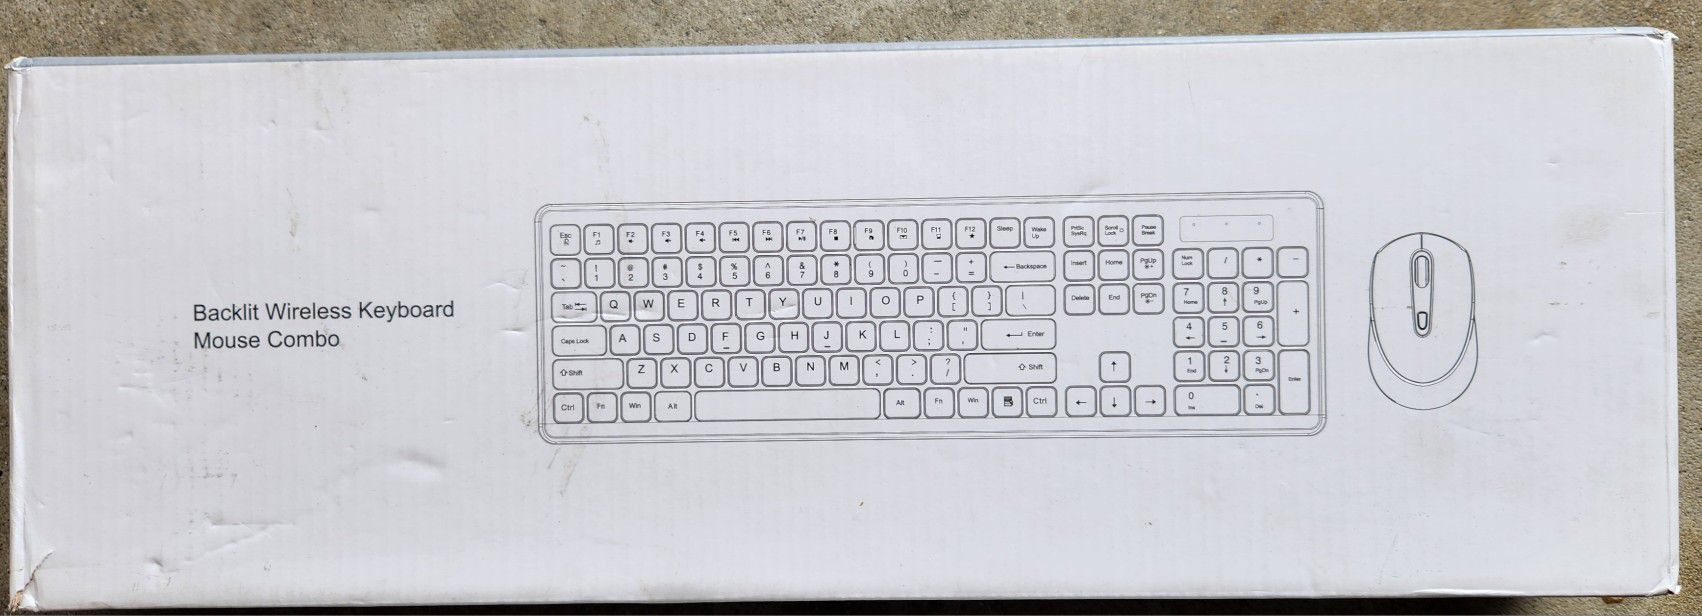 Backlit Wireless Keyboard And Mouse Combo